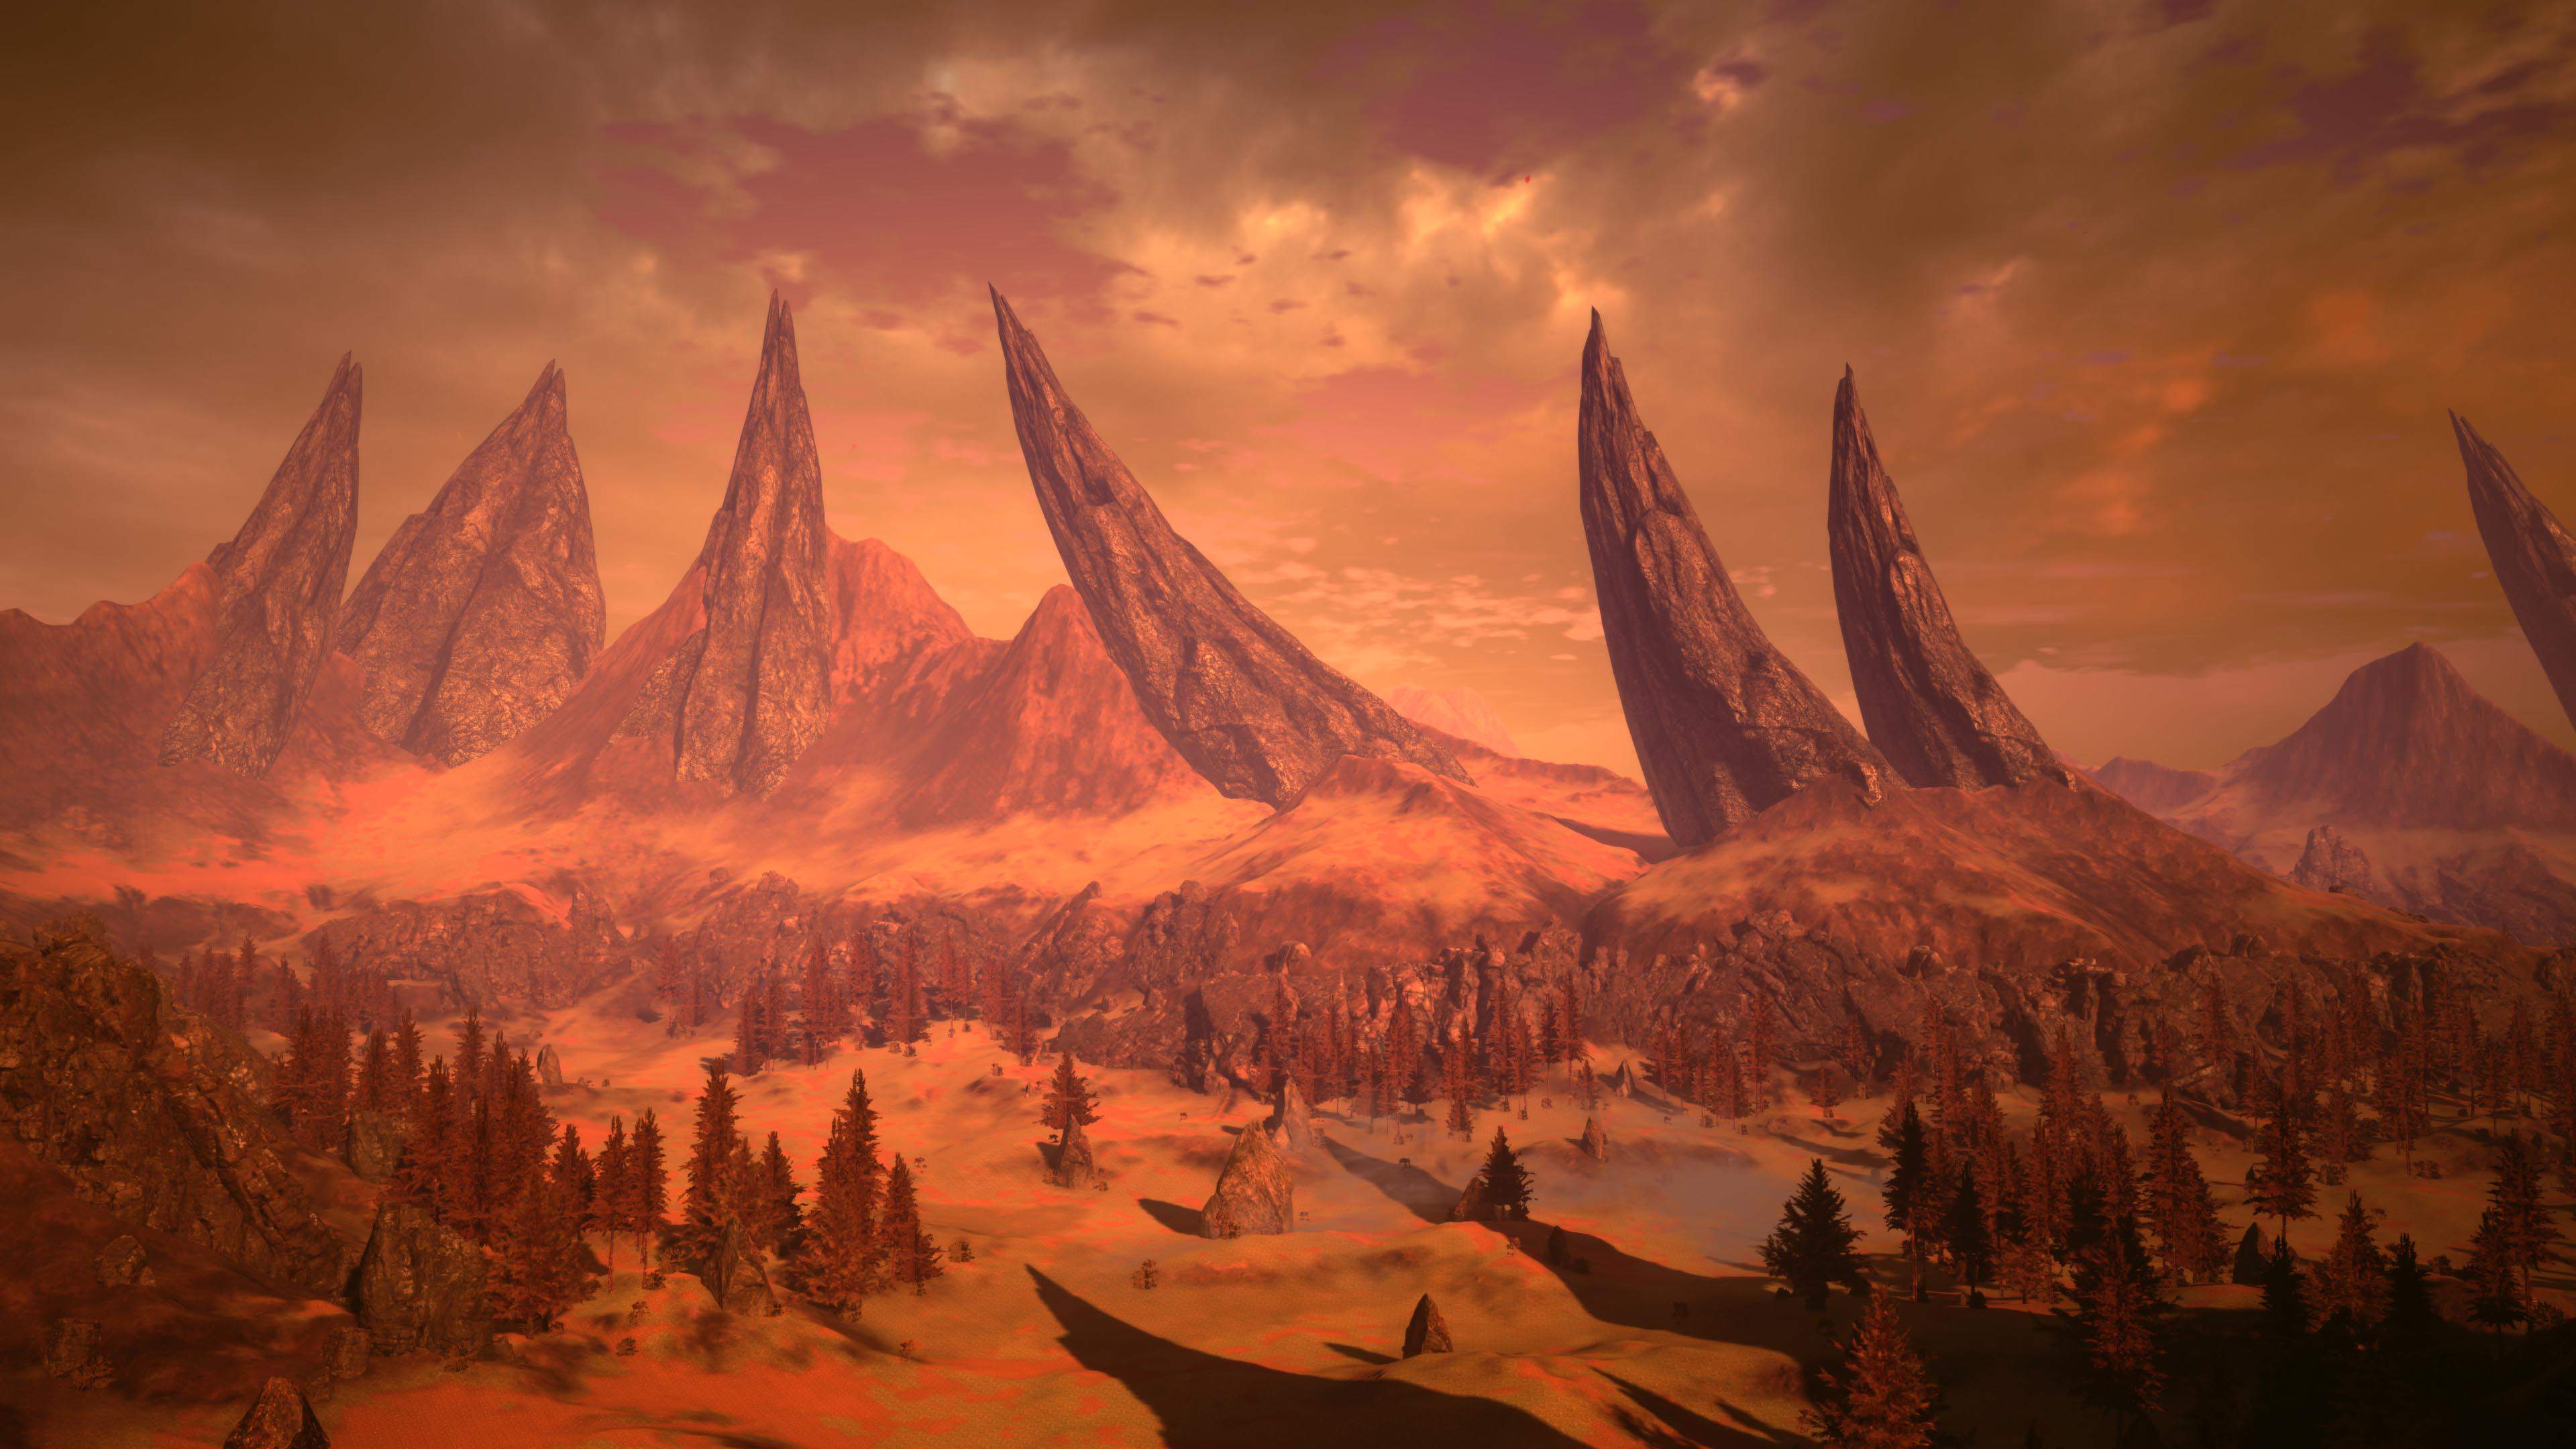 A landscape shot of a barren desert planet with dramatic mountains